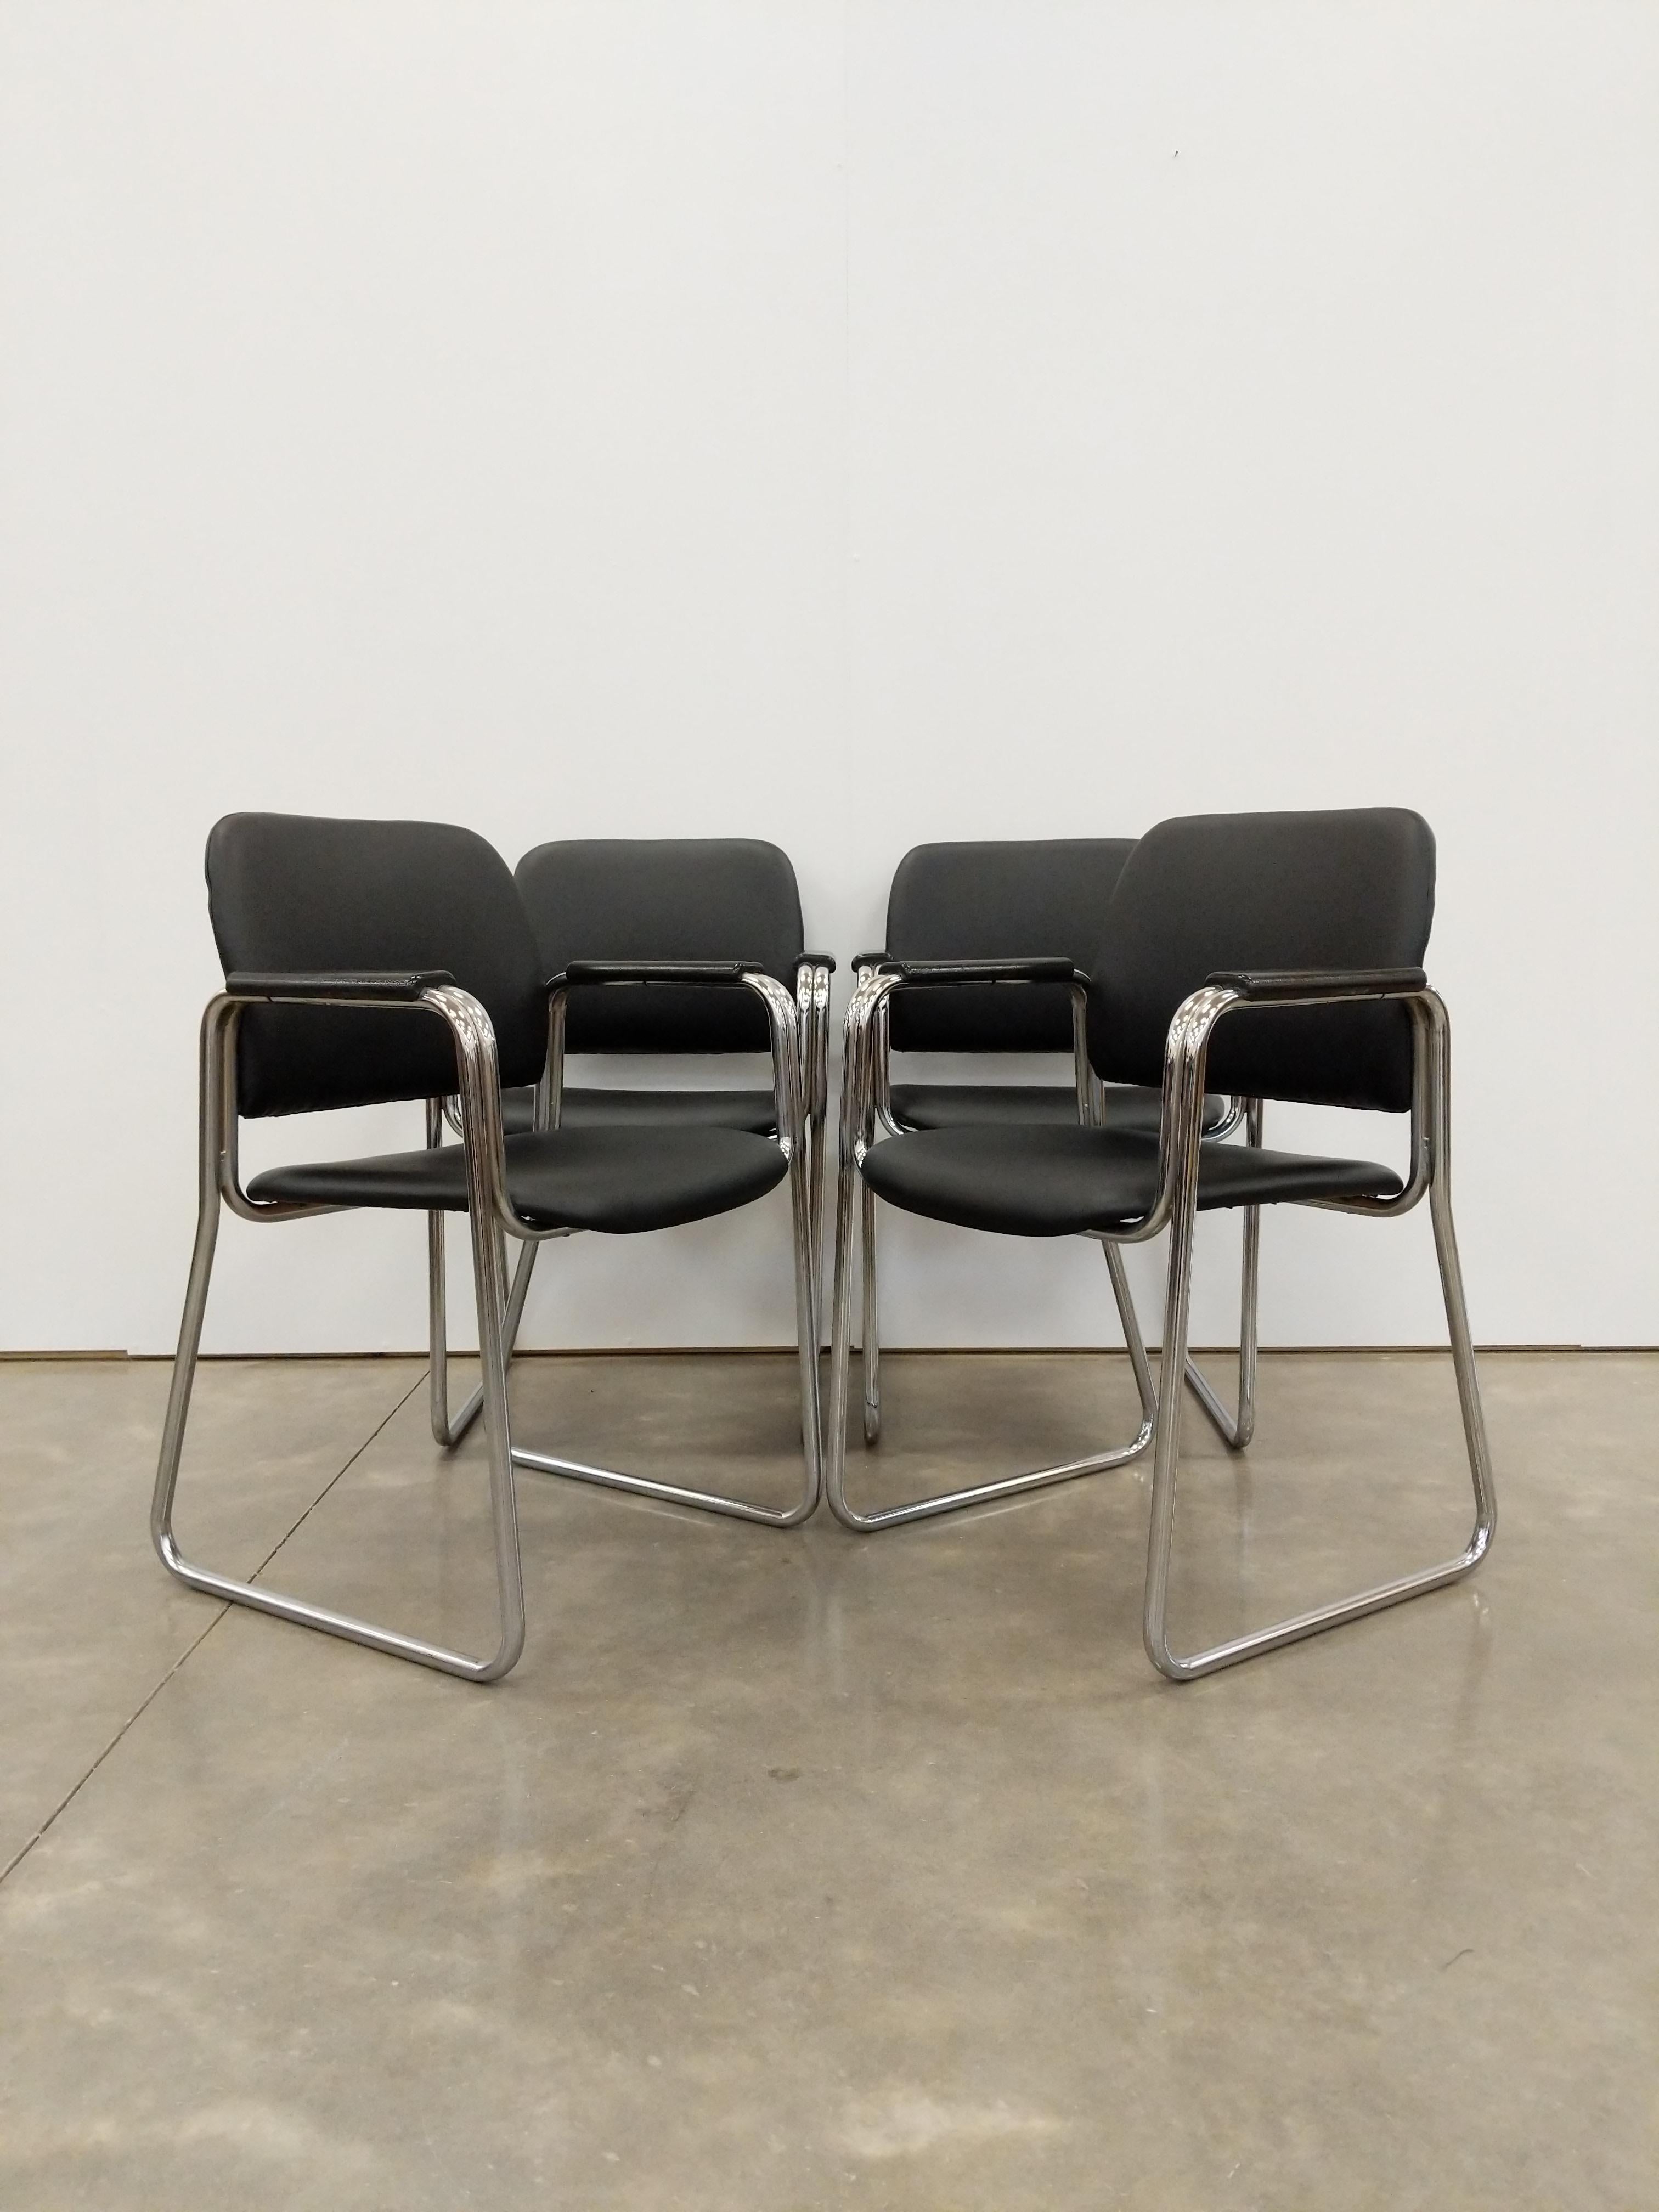 Set of 4 authentic vintage mid century modern Czech chairs.

We can break this set up into pairs if you only want 2 chairs, just contact us.

This set is in great vintage condition with brand new upholstery and very few signs of age-related wear